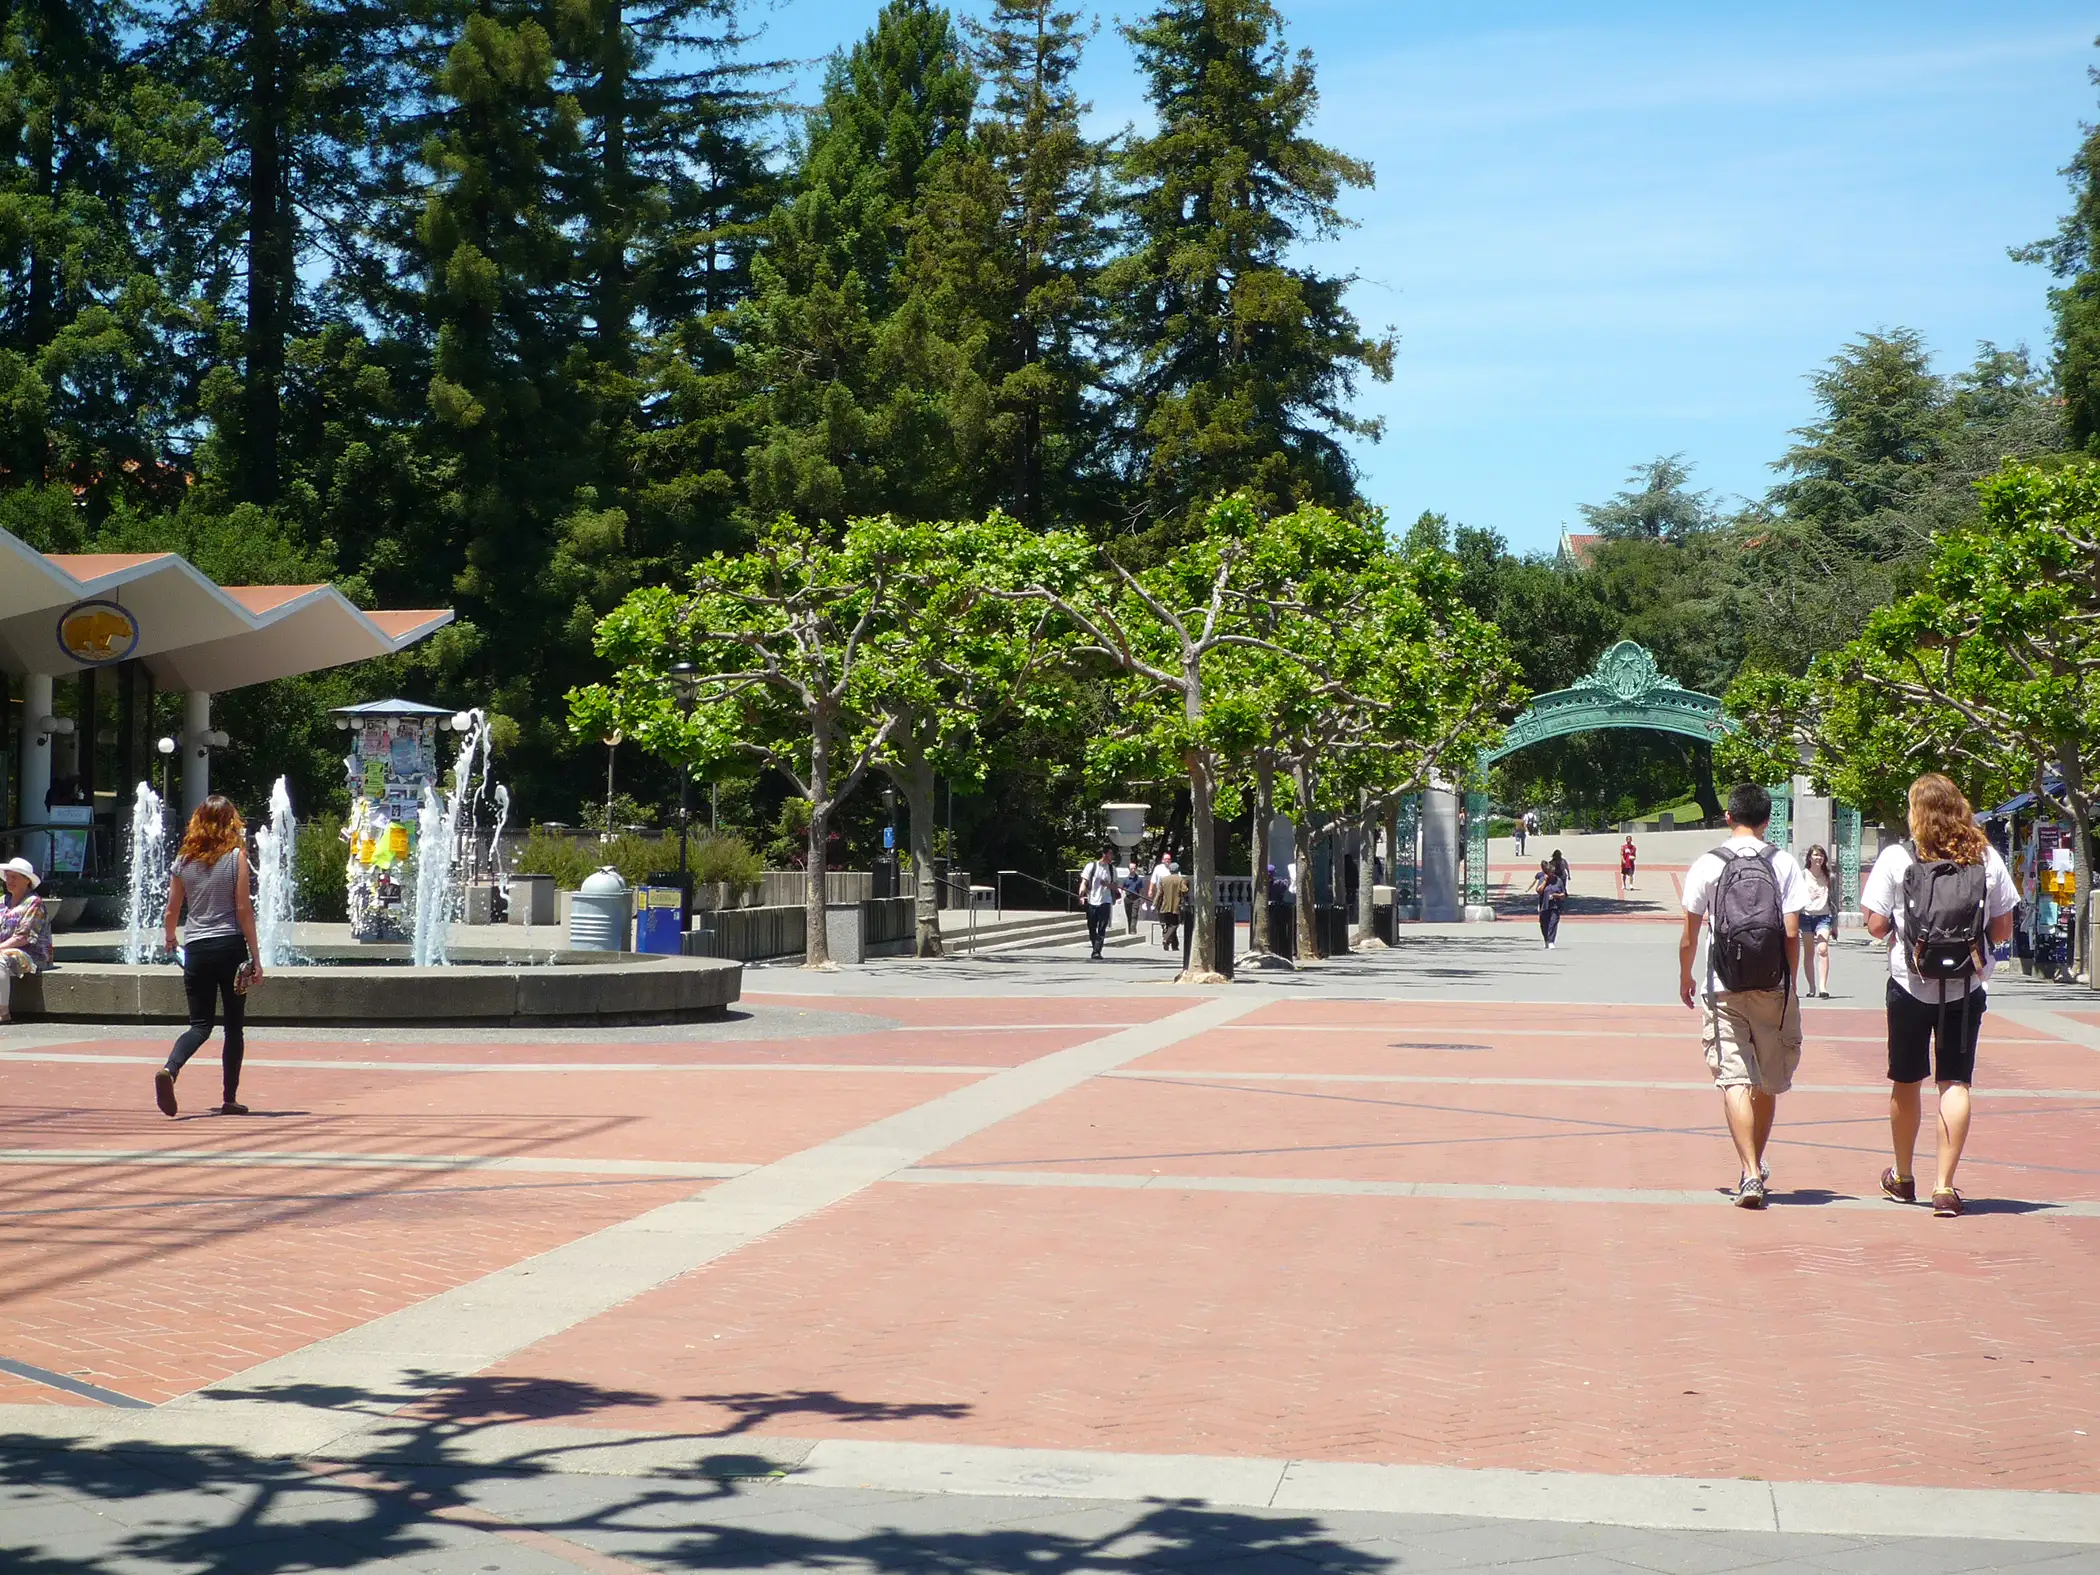 Students walking on Sproul Plaza, Sather Gate in back, University of California-Berkeley